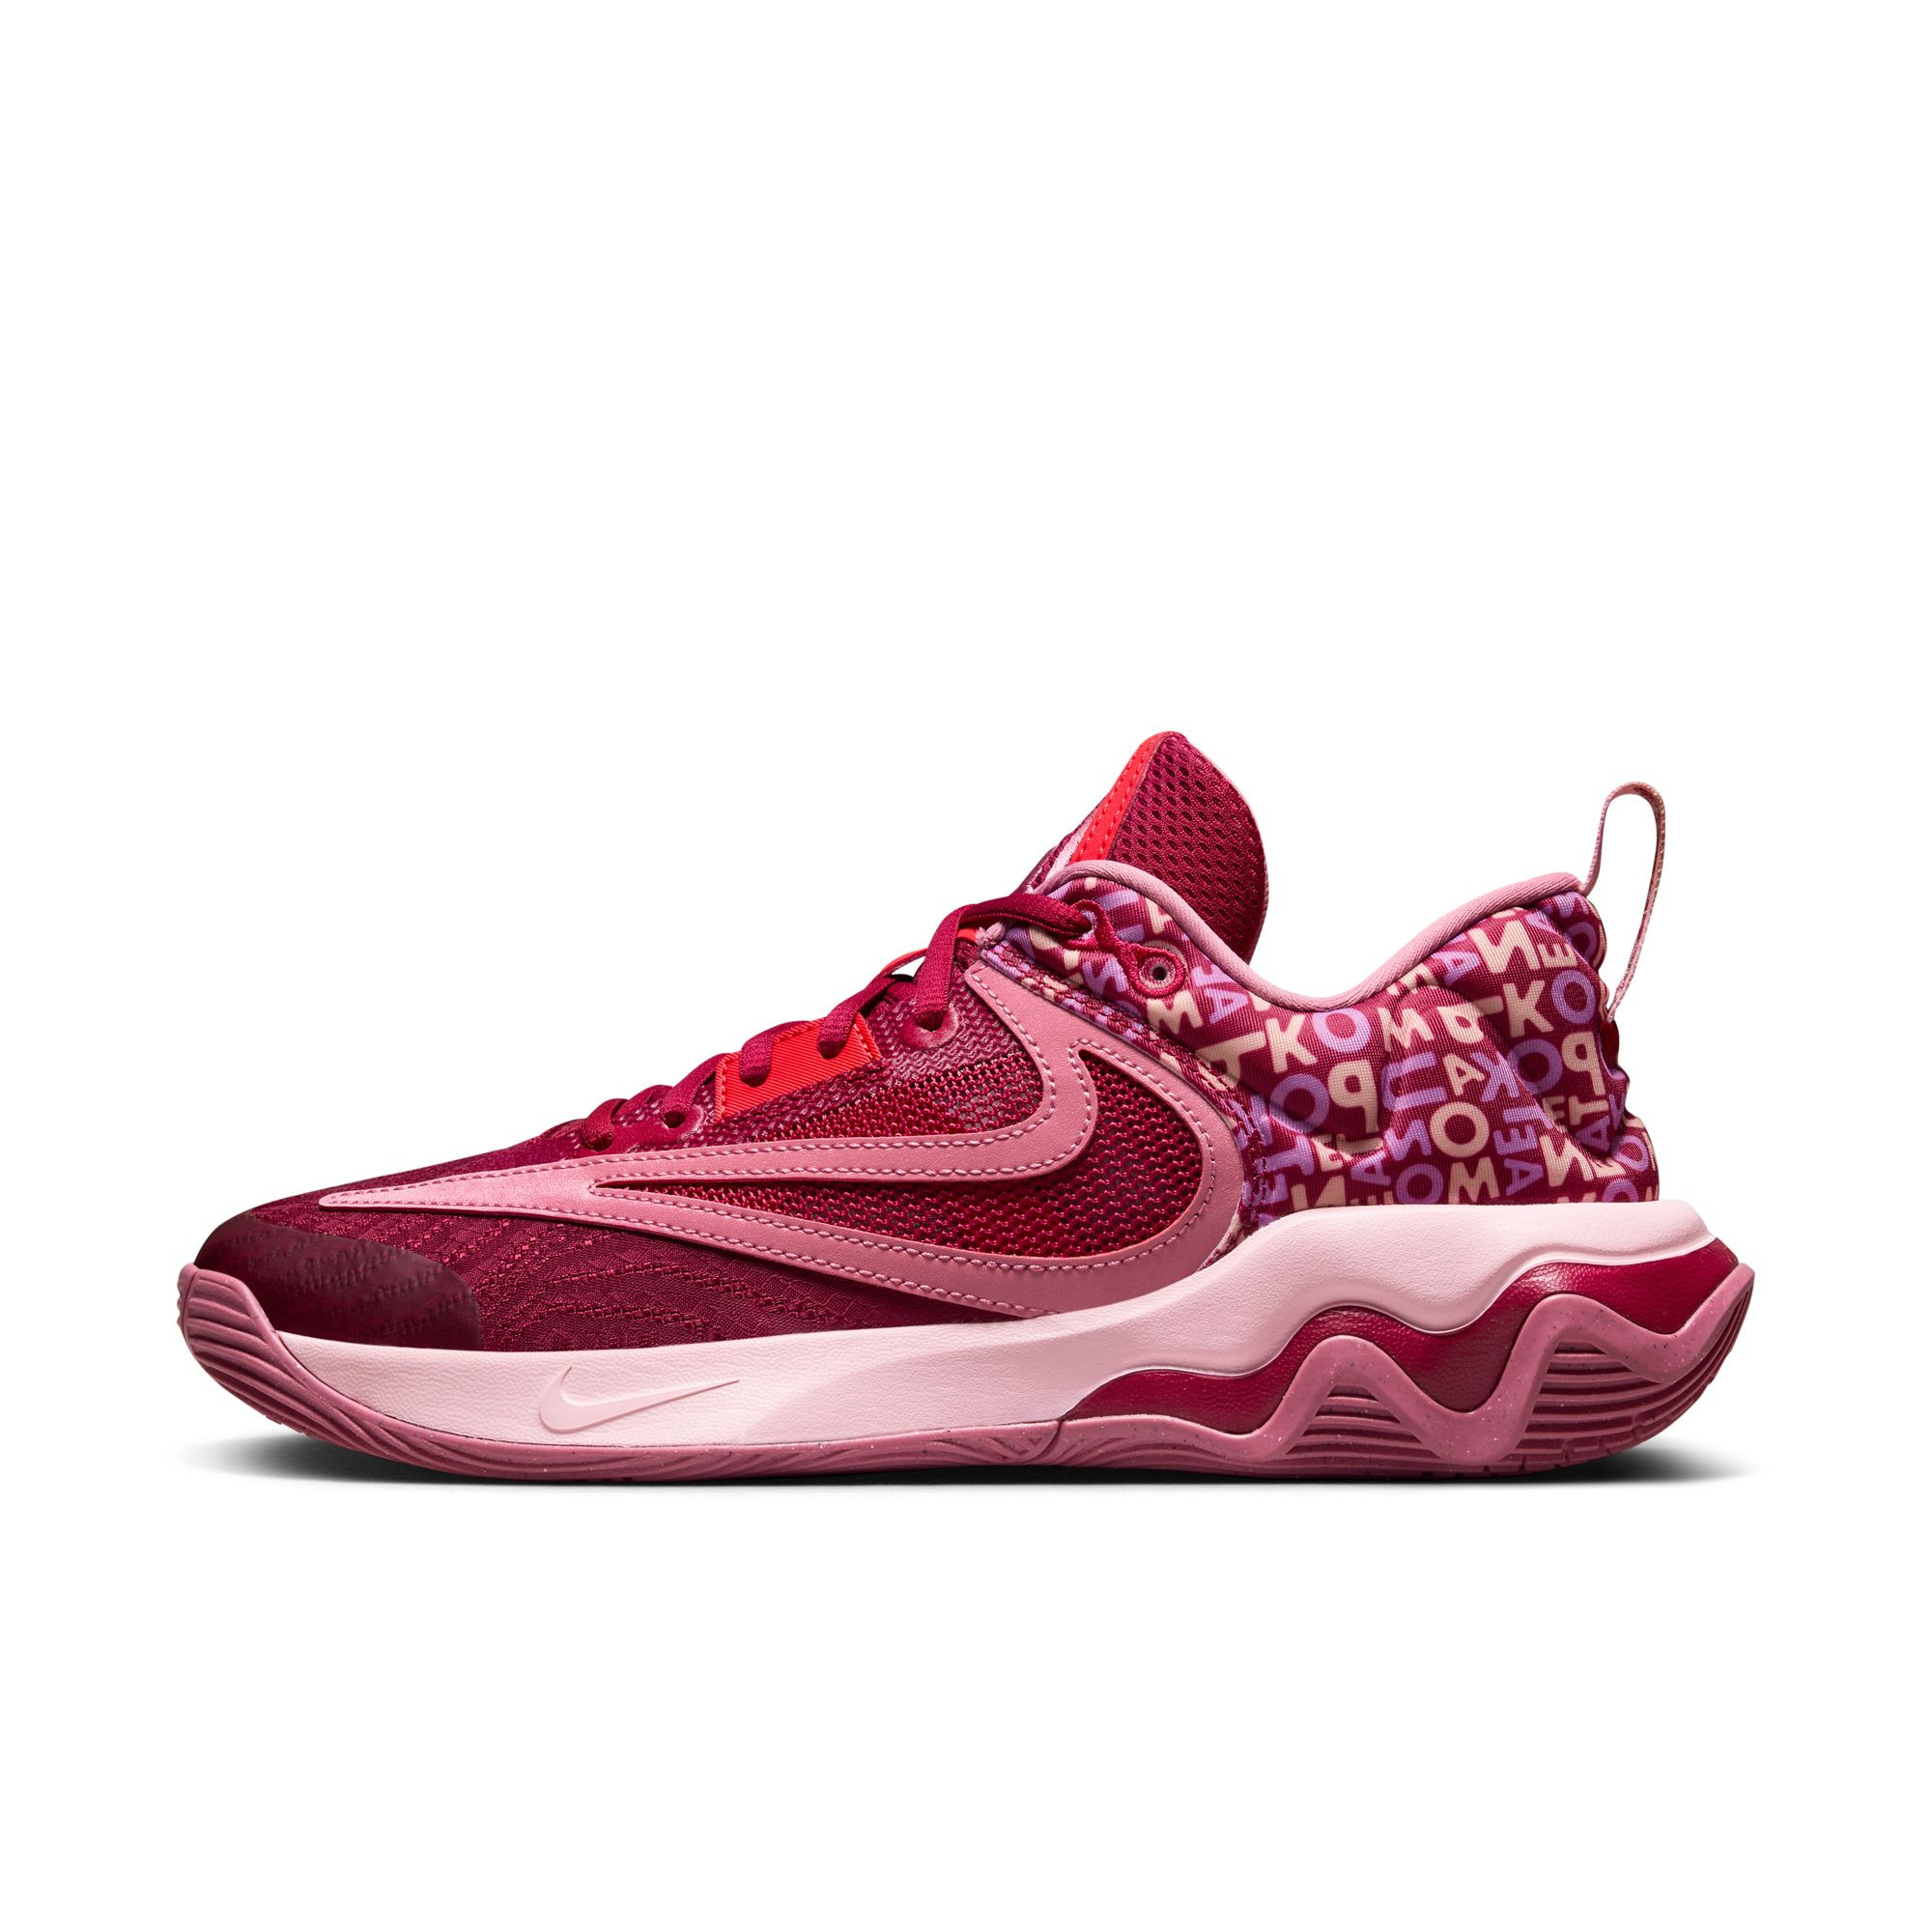 Chaussures Nike Giannis Immortality 3 - Noble Red/Ice Peach-Desert Berry